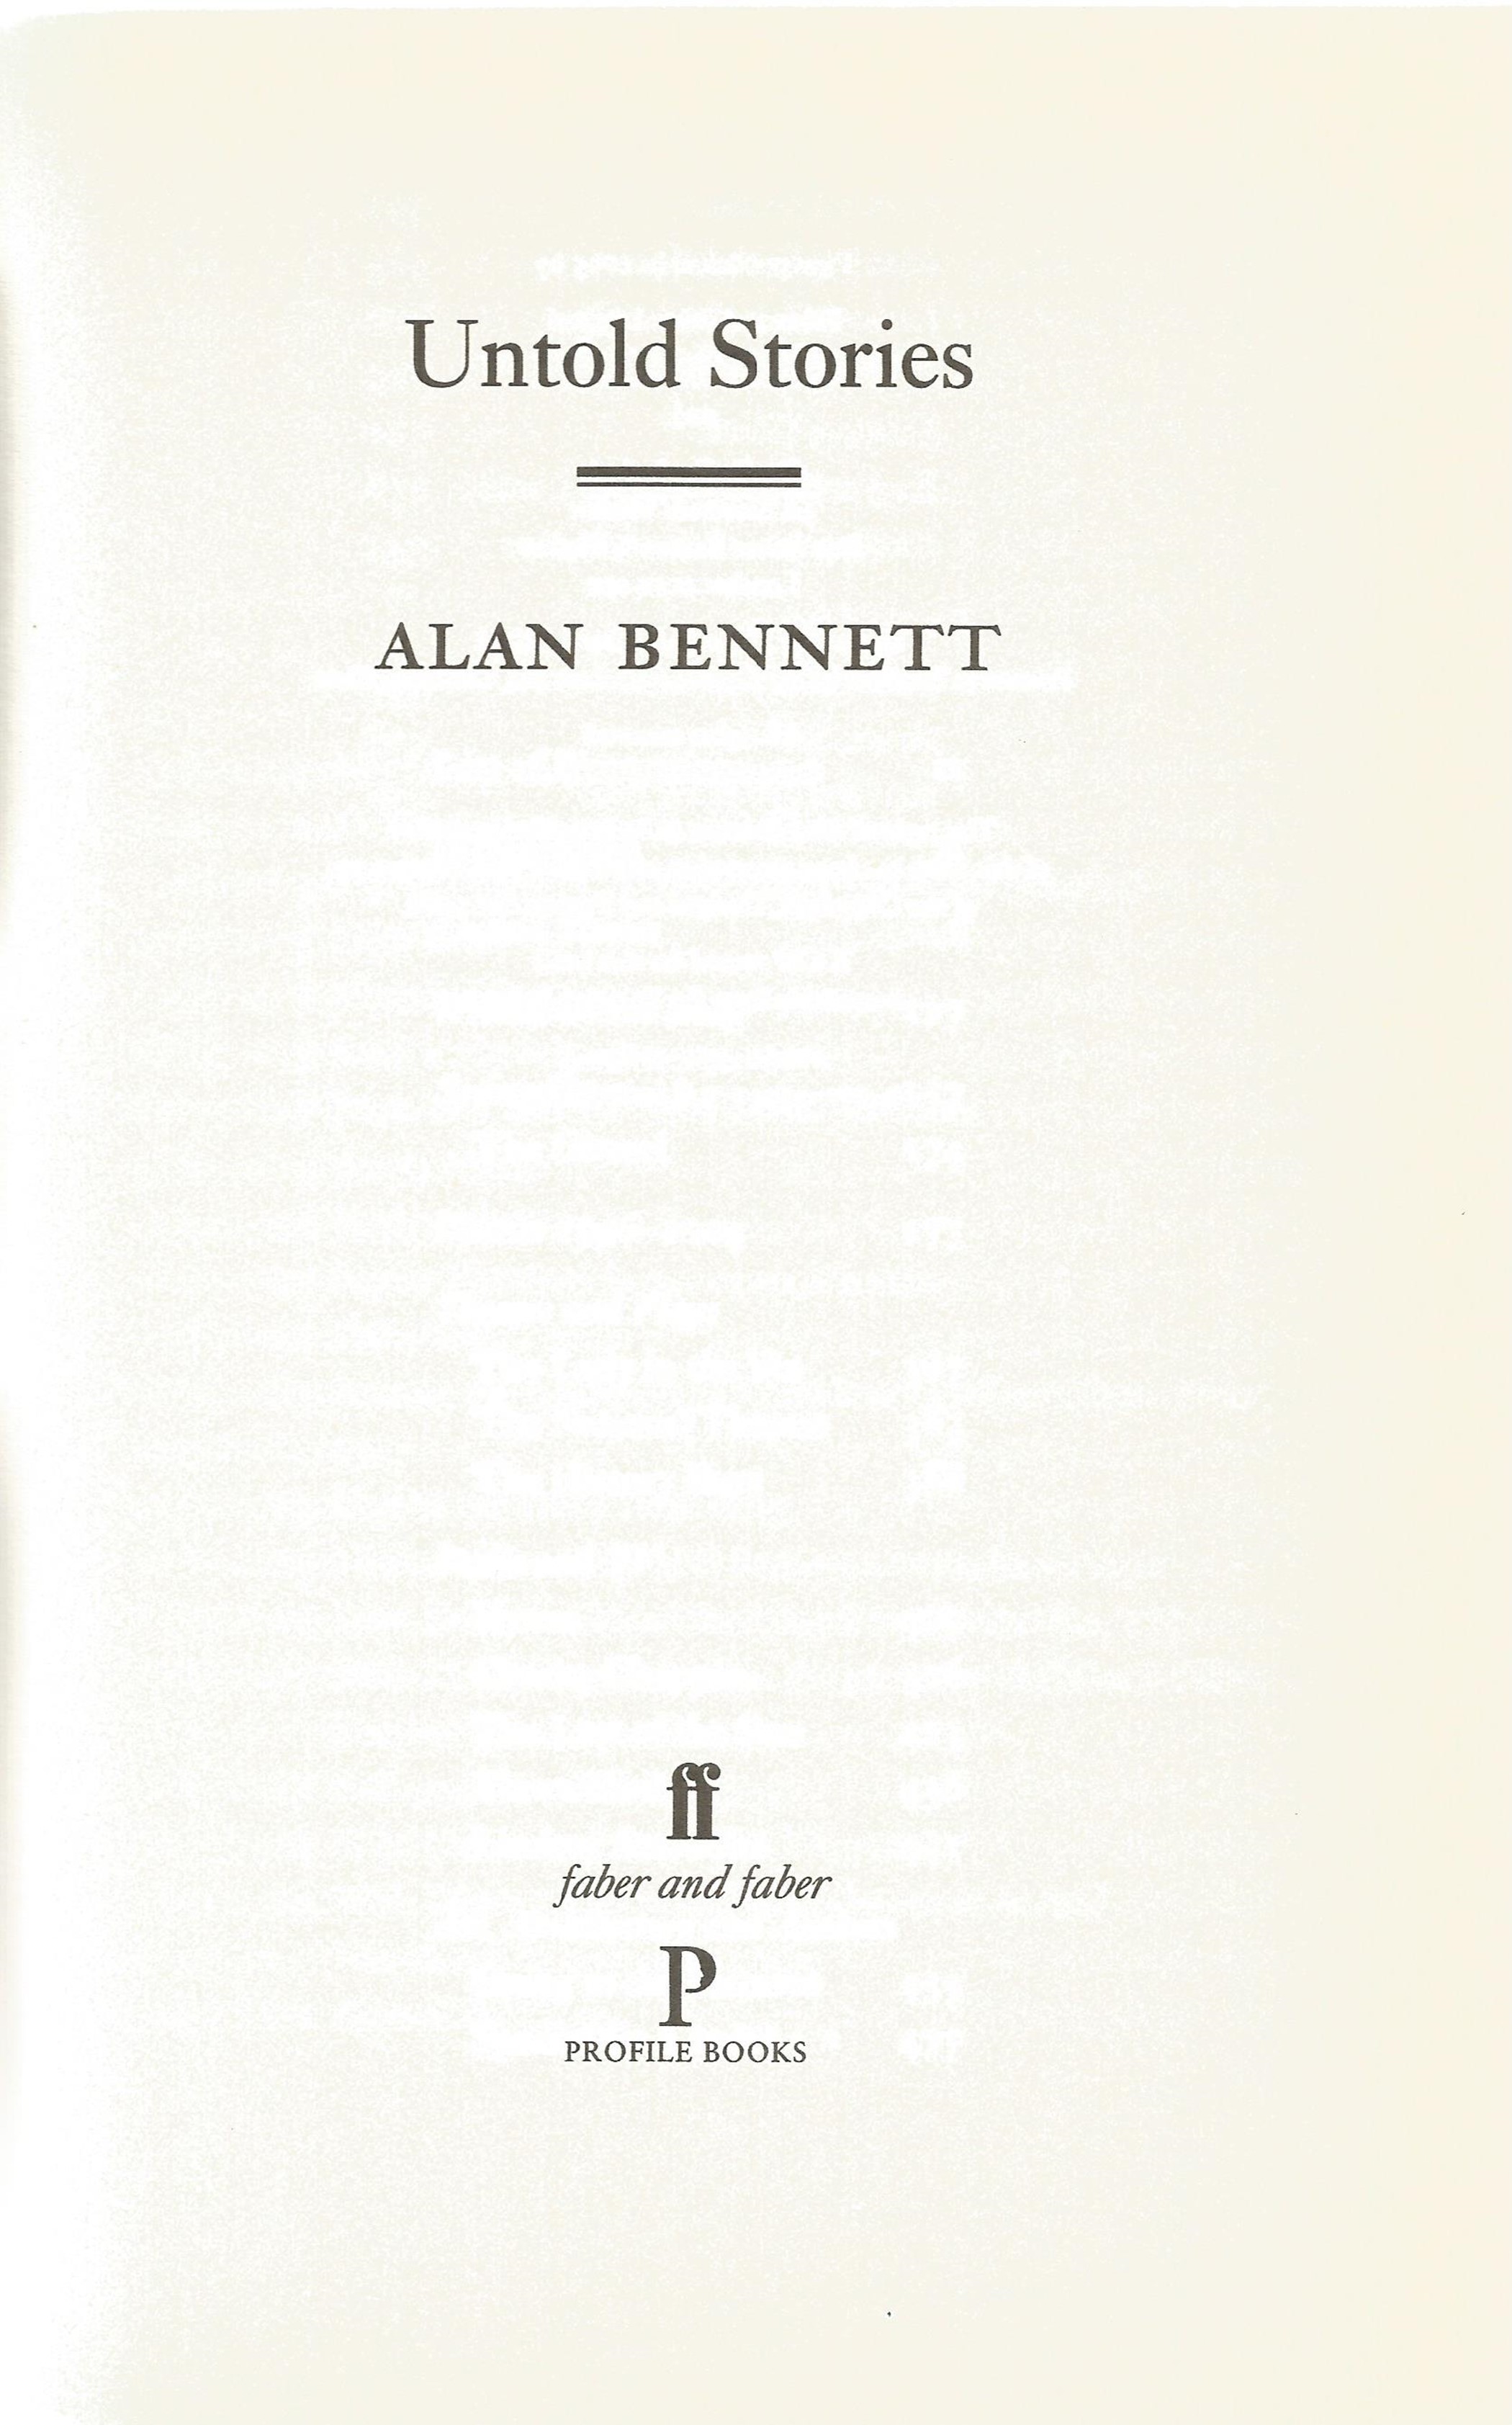 Untold Stories by Alan Bennett Hardback Book 2005 First Edition published by Faber and Faber Ltd and - Image 2 of 3